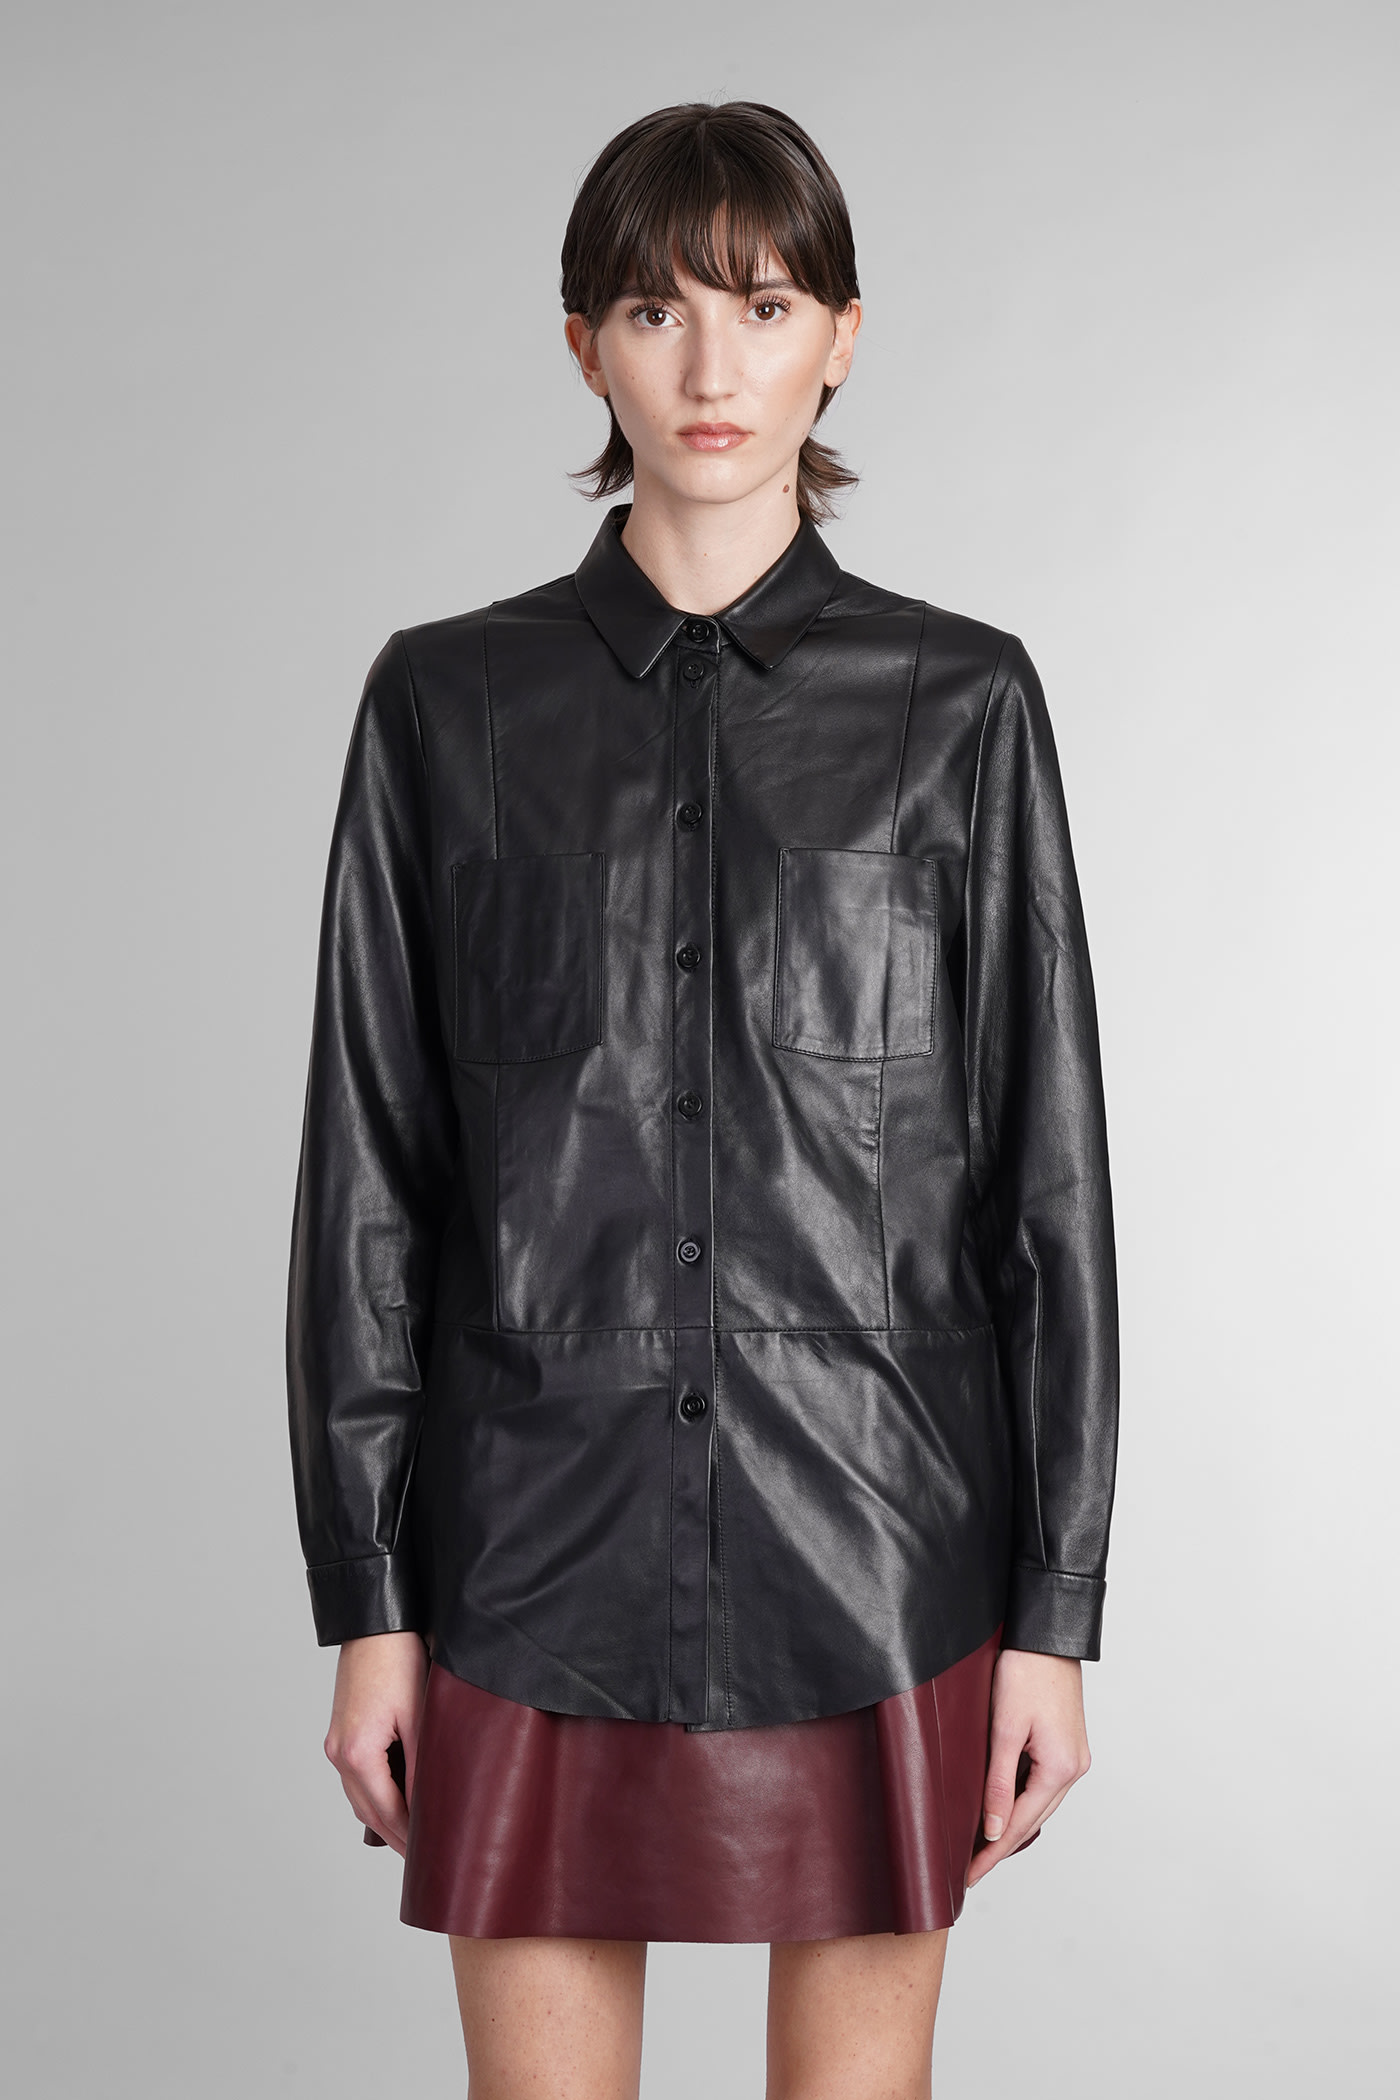 DROMe Shirt In Black Leather